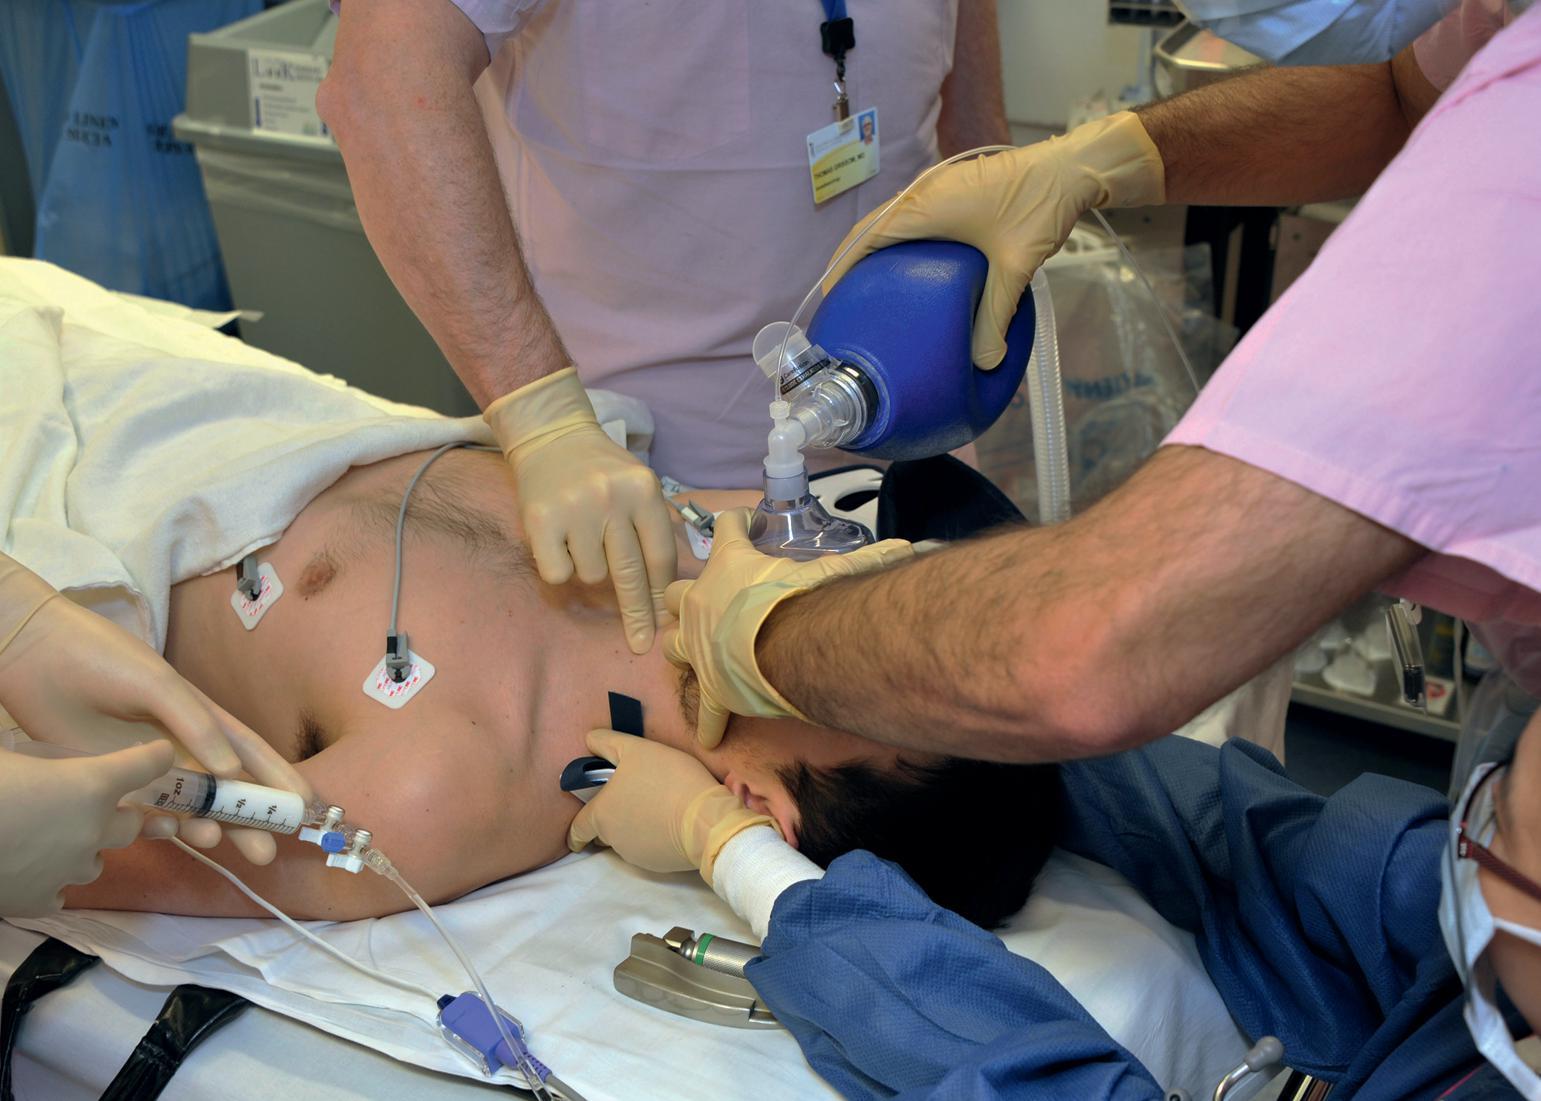 Fig. 34.1, Rapid sequence induction and intubation integrating manual in-line stabilization of cervical spine, application of cricoid pressure, preoxygenation, and administration of induction agents.